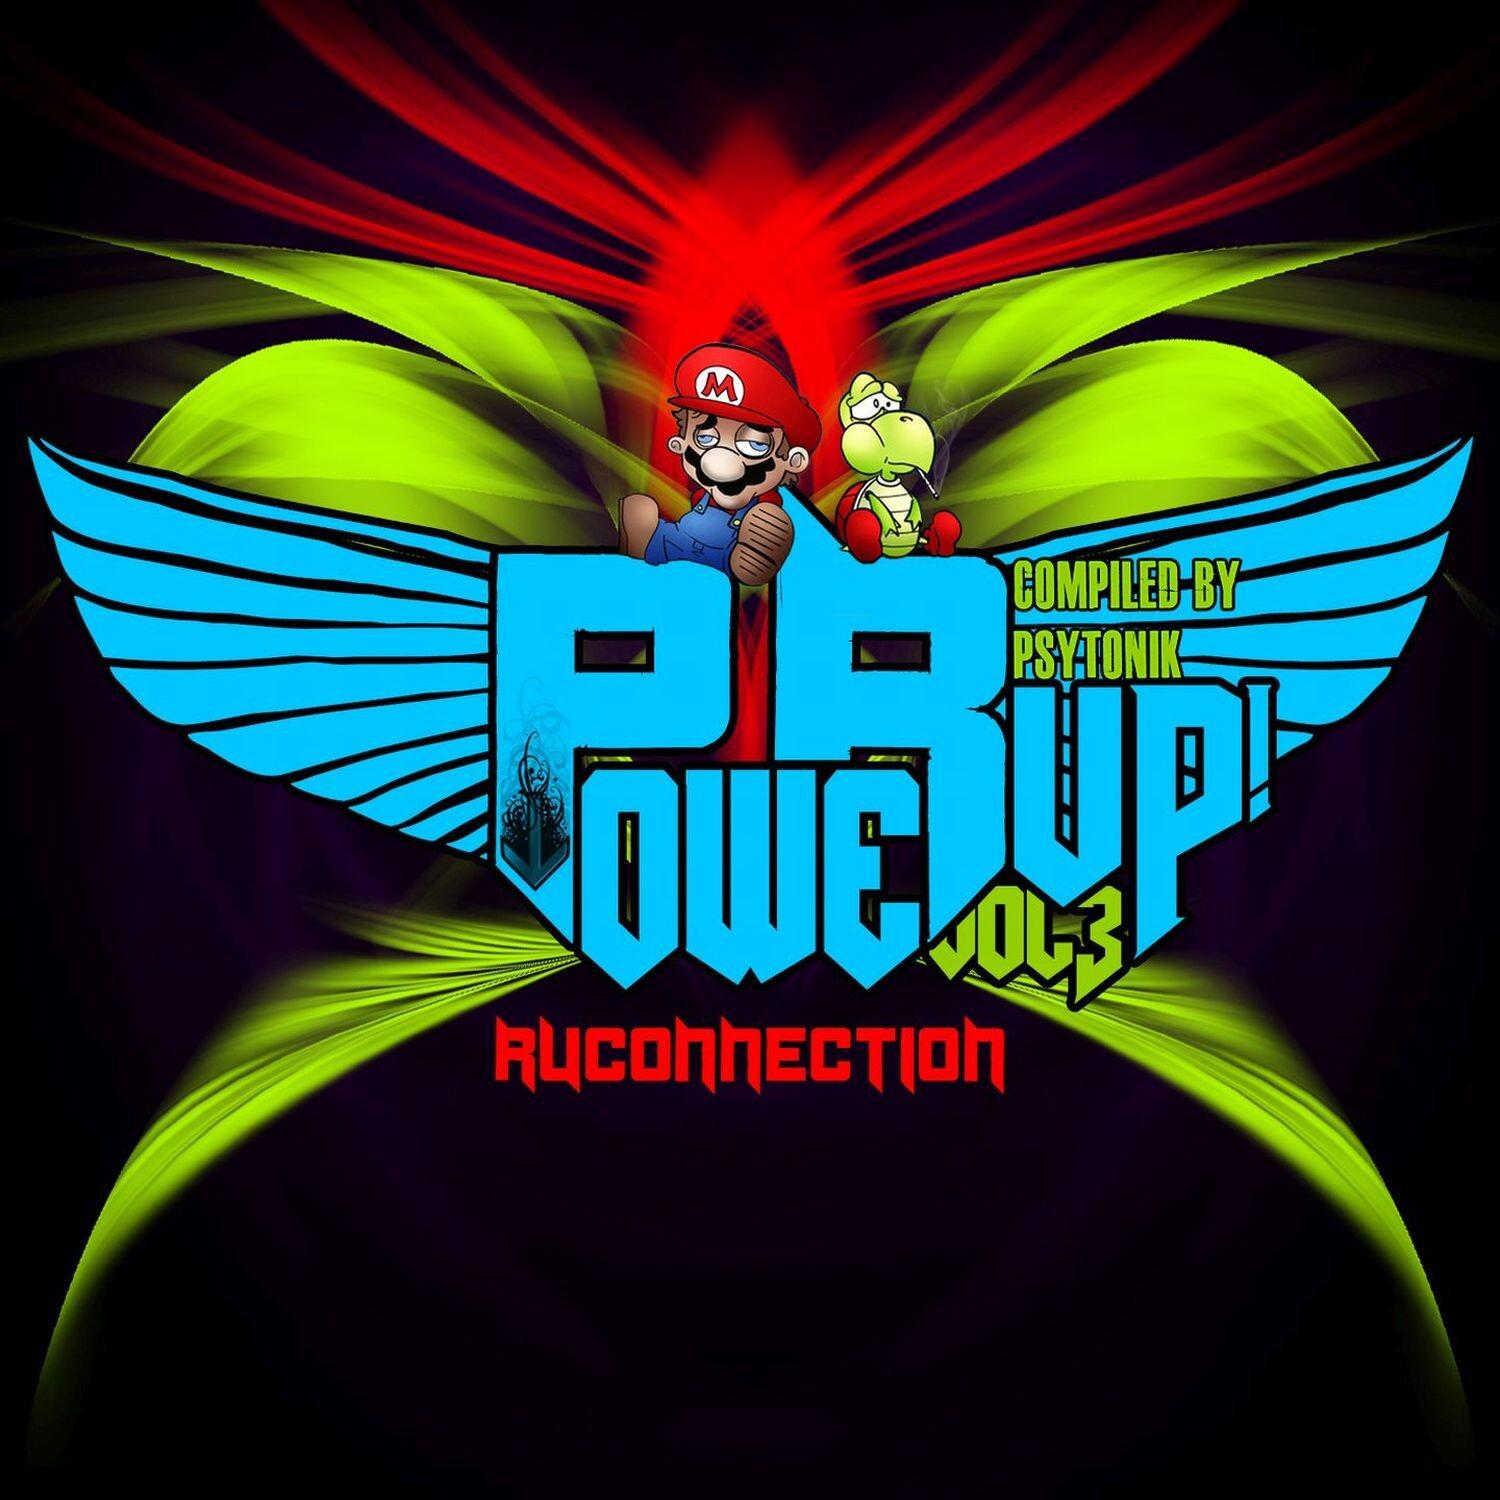 Power Up (Compiled by Psytonik)